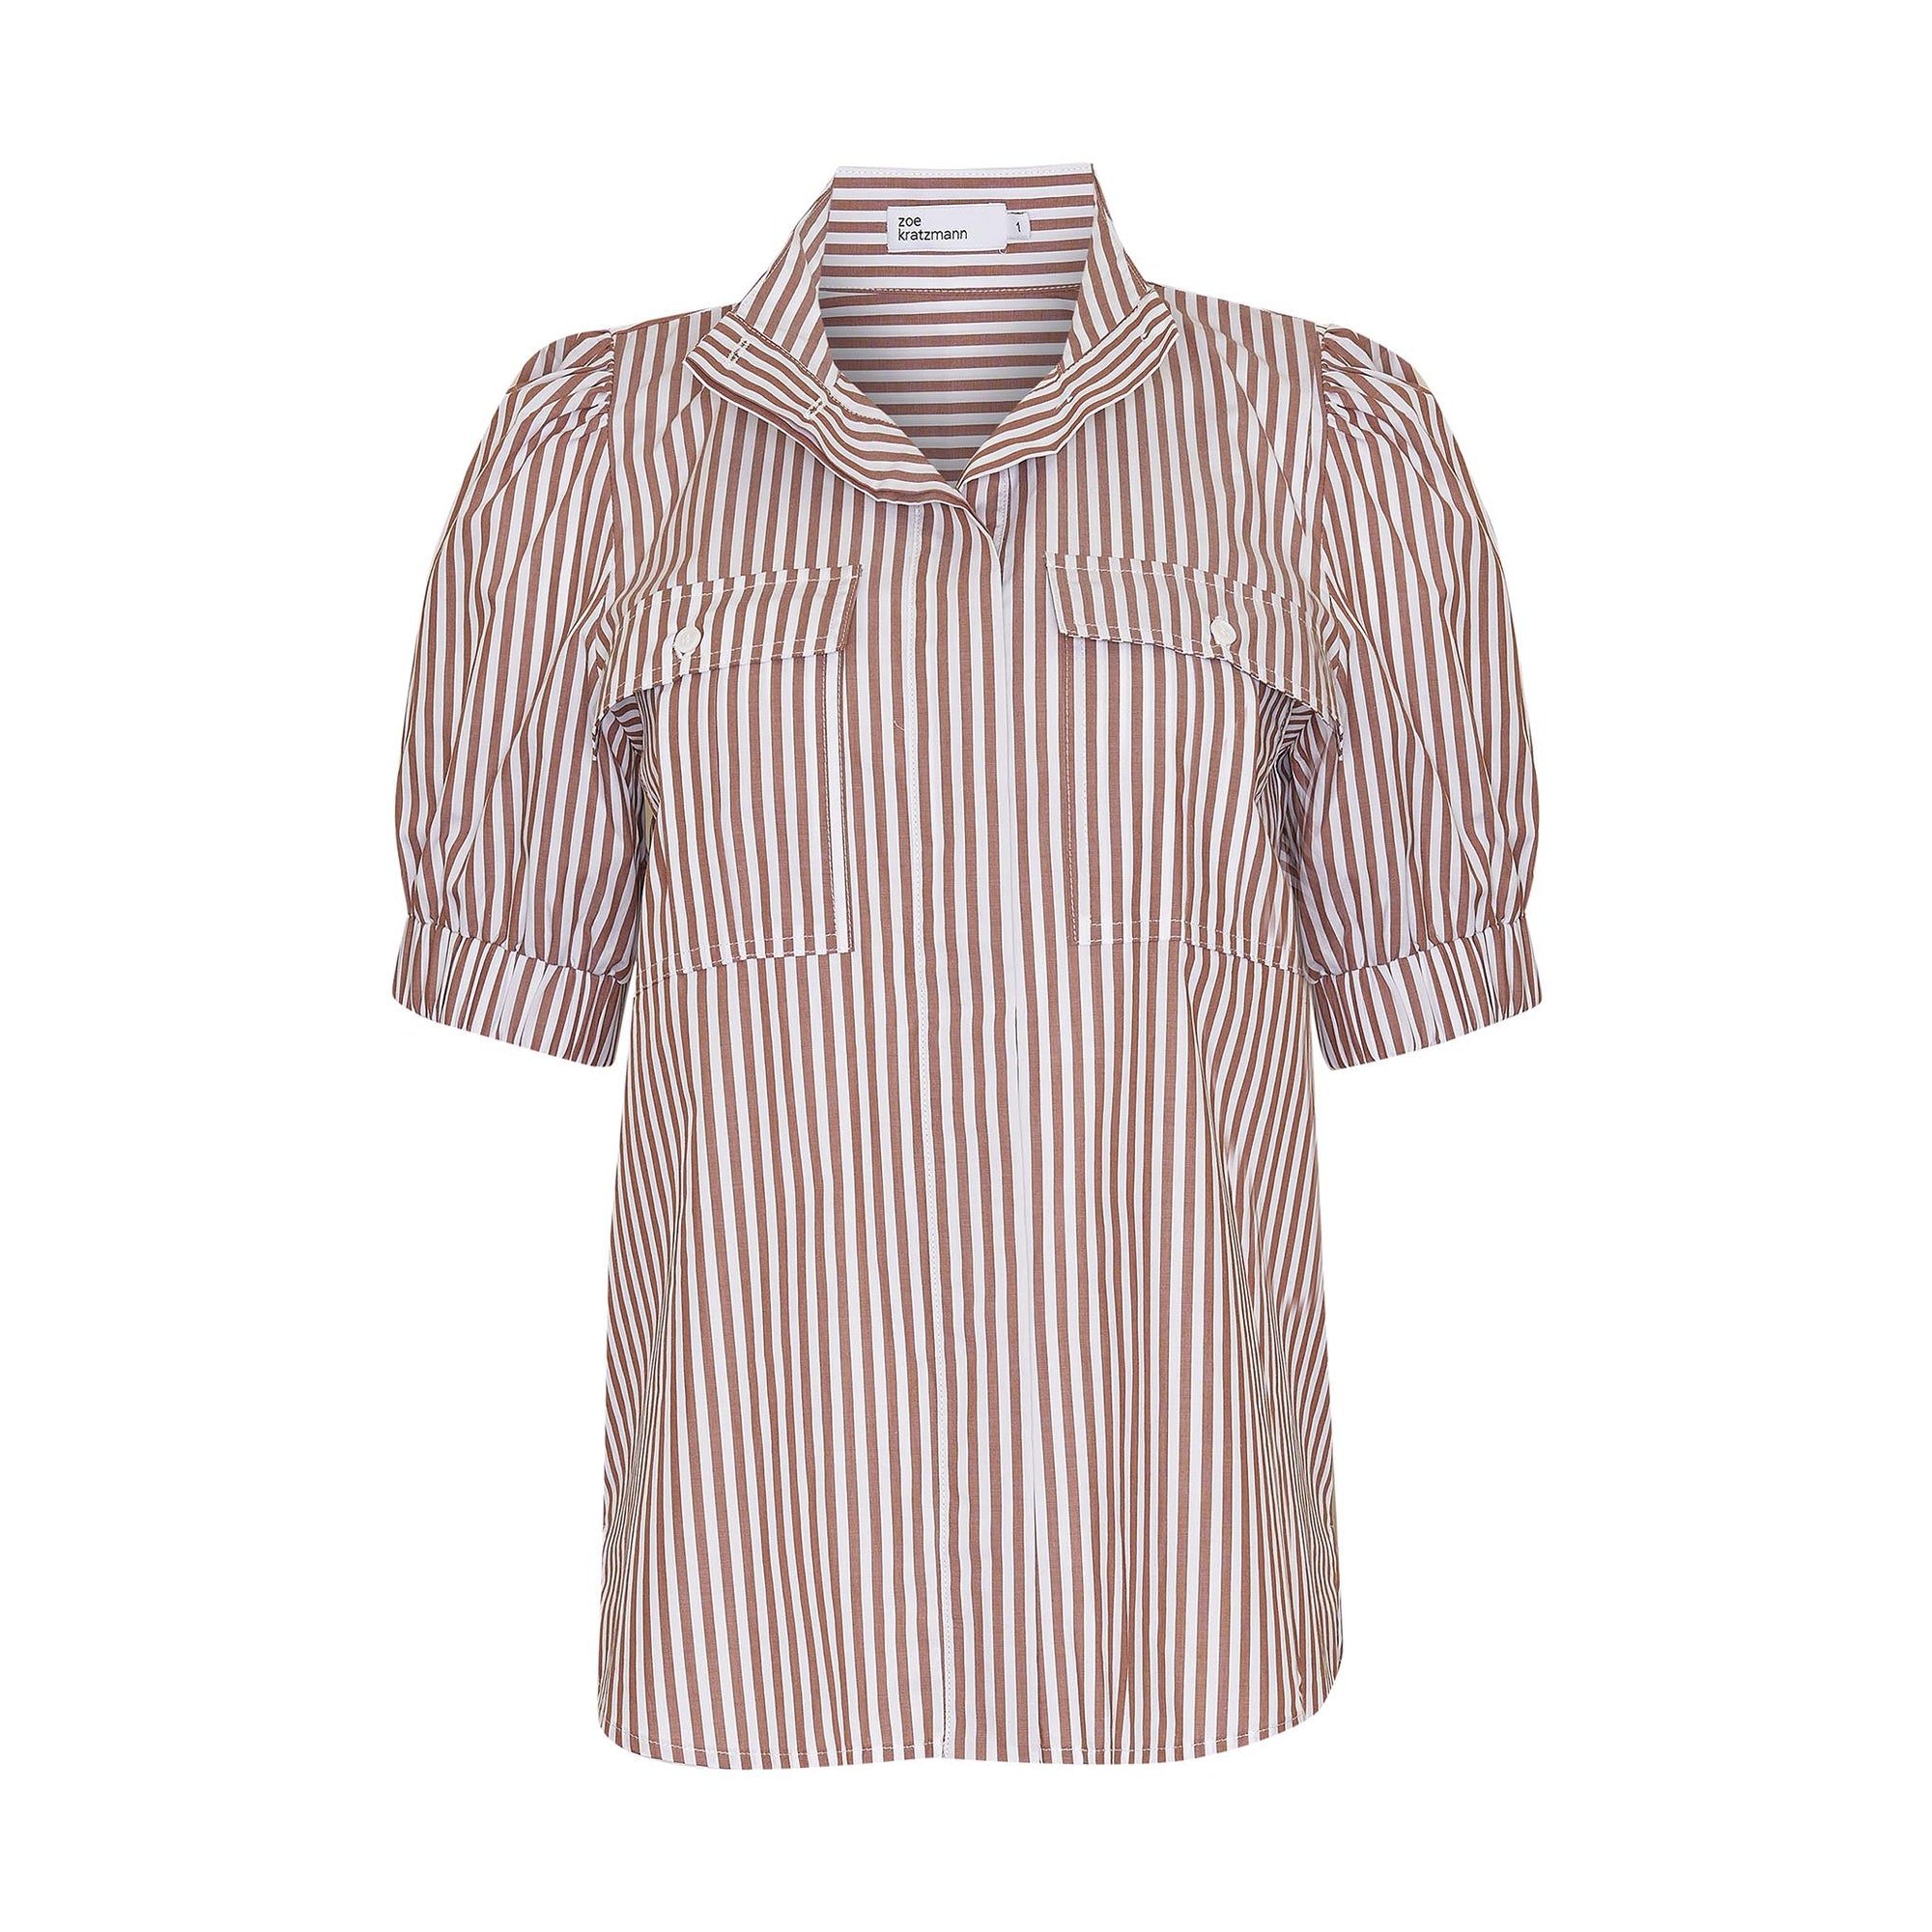 brown stripe, high neck, button up shirt, top, product image